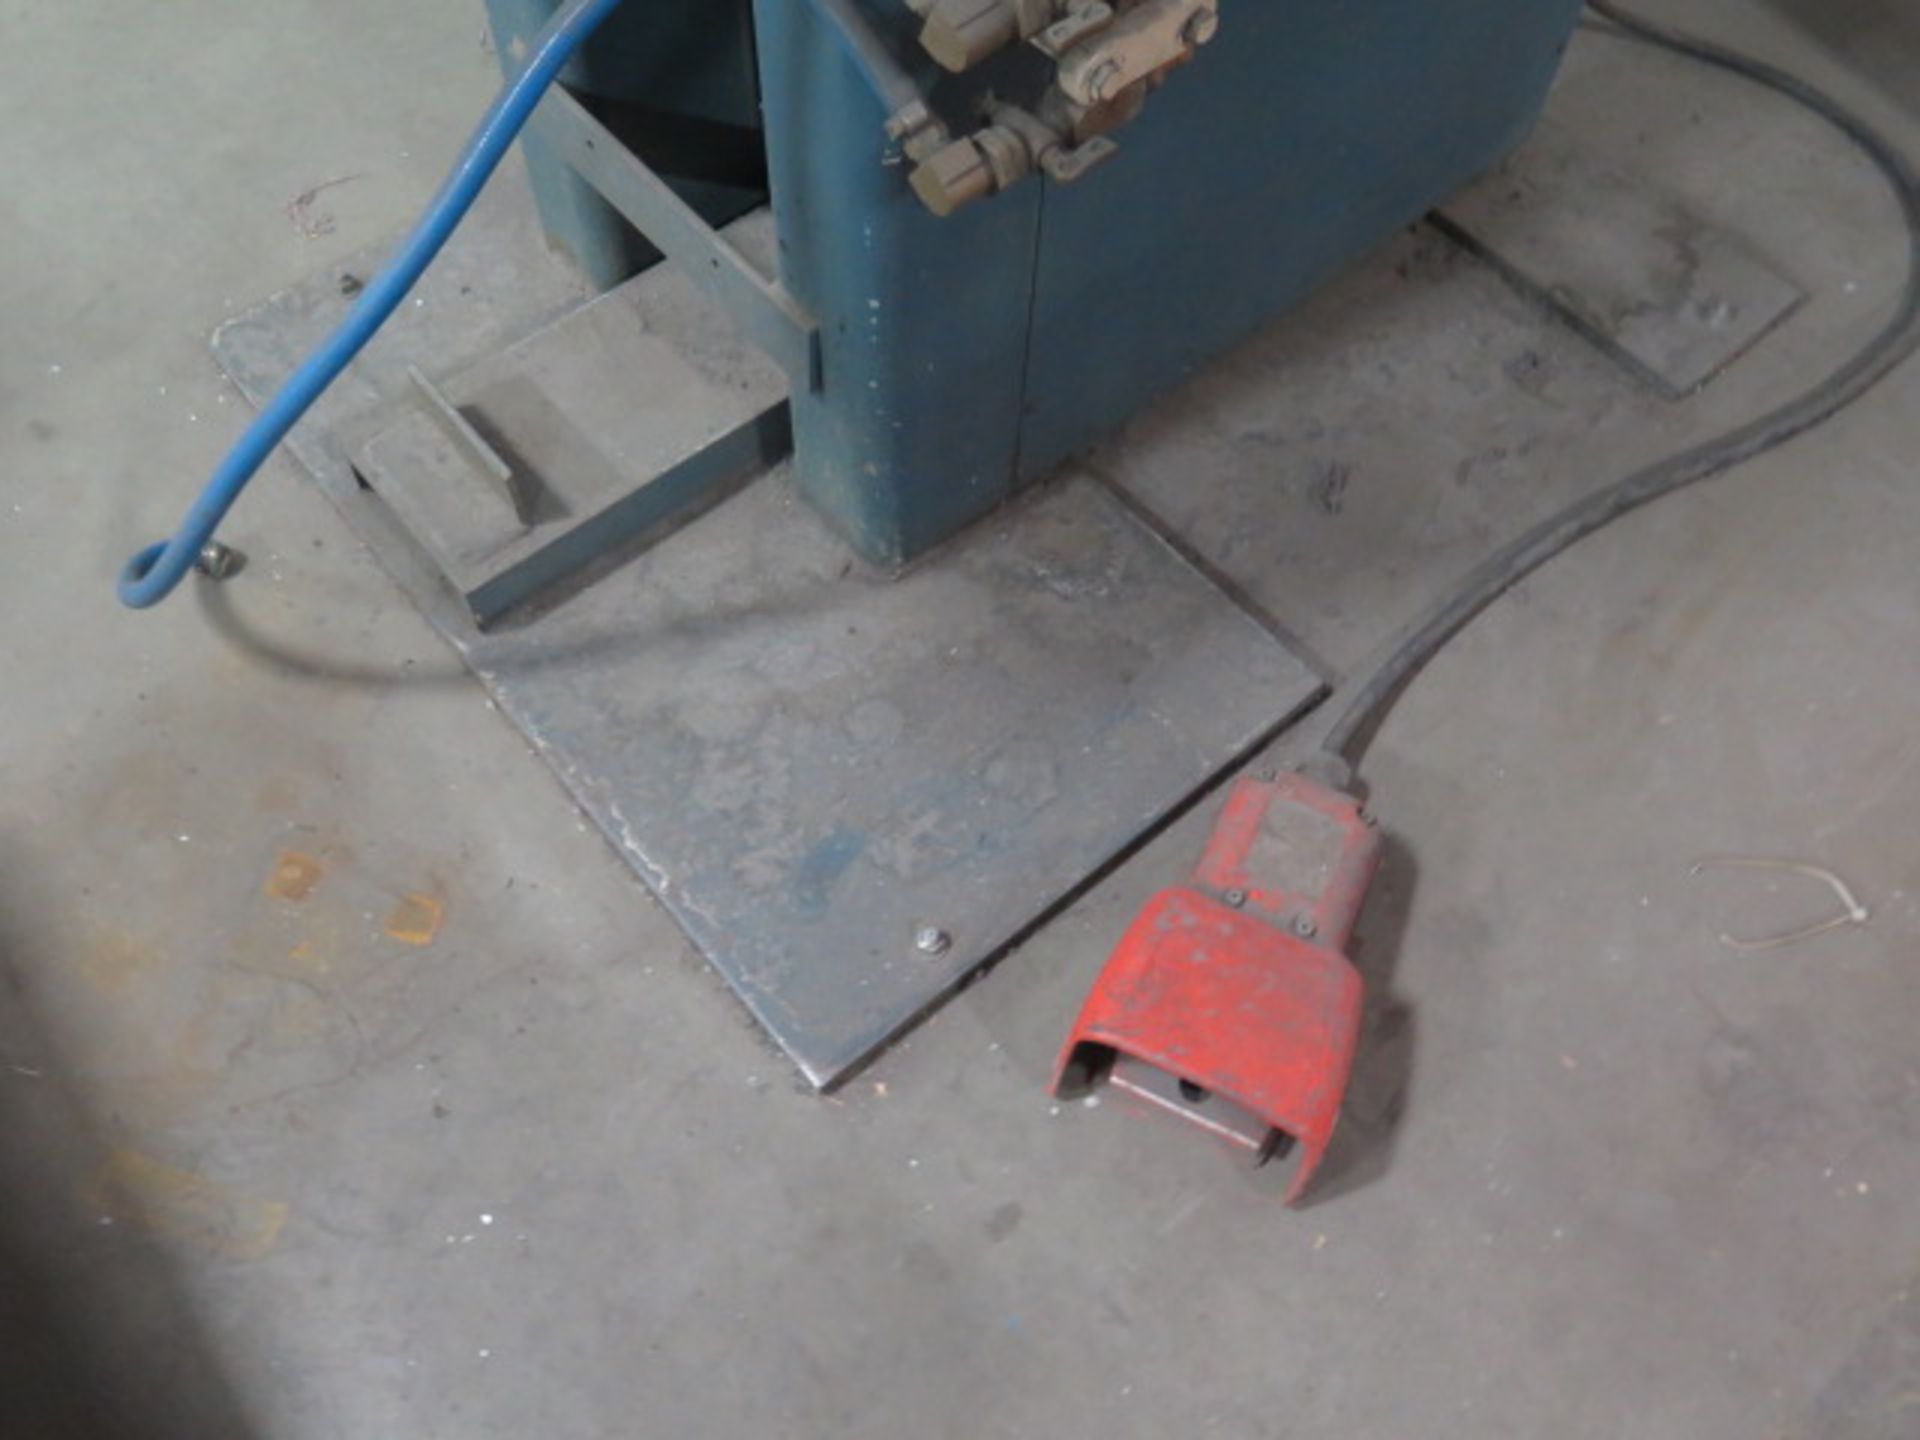 Entron Pneumatic Actuated Spot Welder s/n L-8981 w/ Entron Controls (SOLD AS-IS - NO WARRANTY) - Image 6 of 8